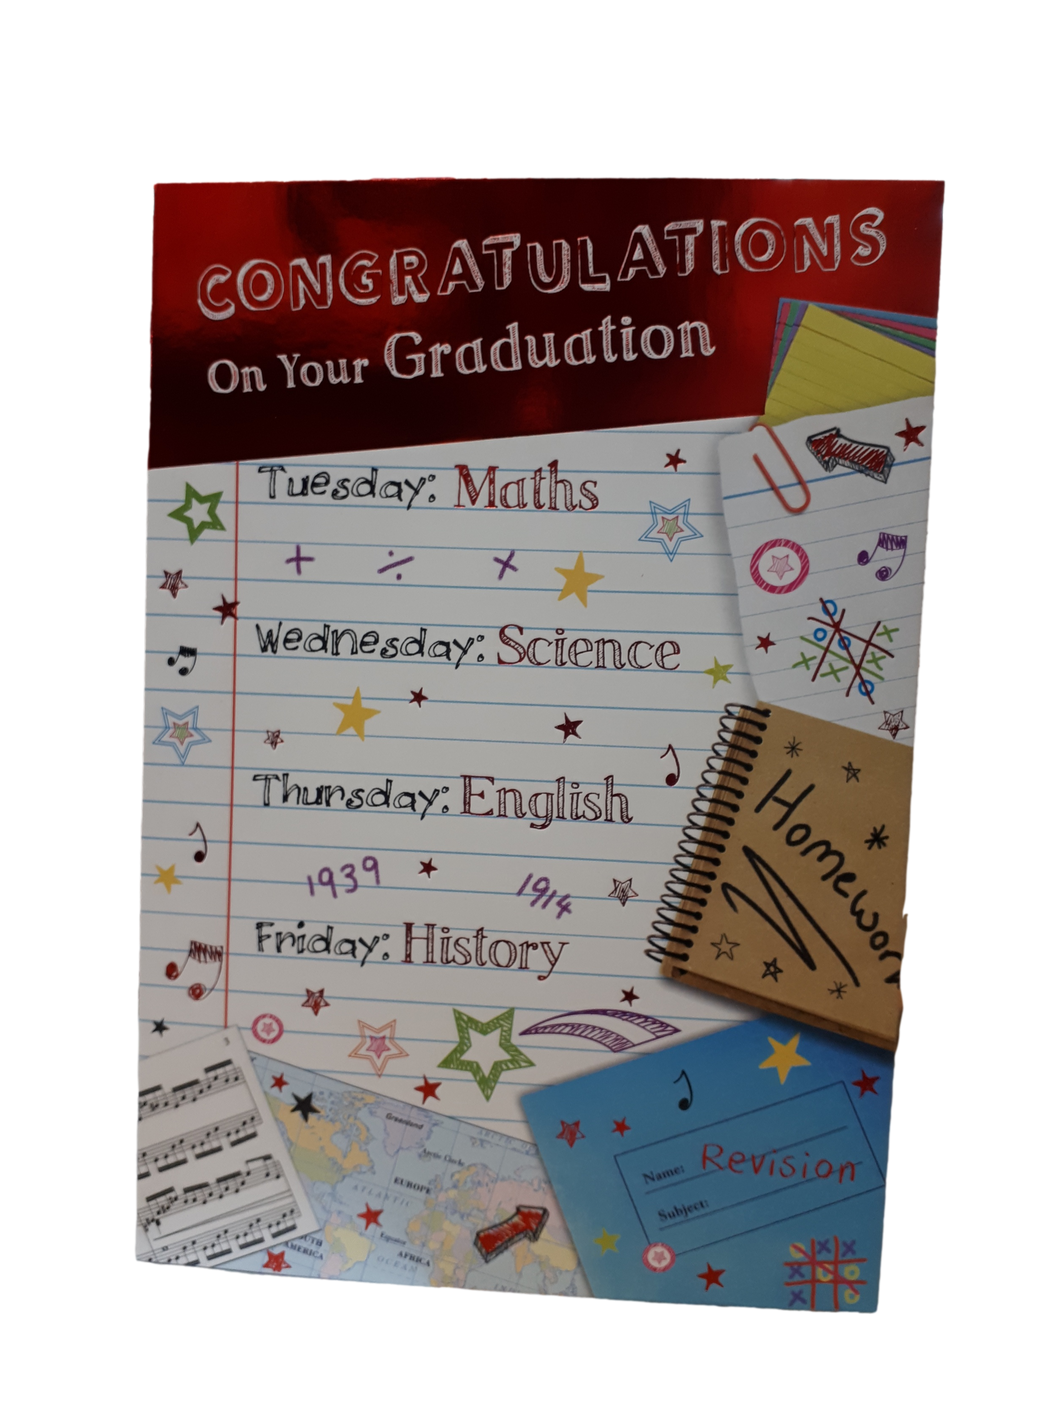 Congratulations On Your Graduation - Greeting Card - Journal - Free Postage